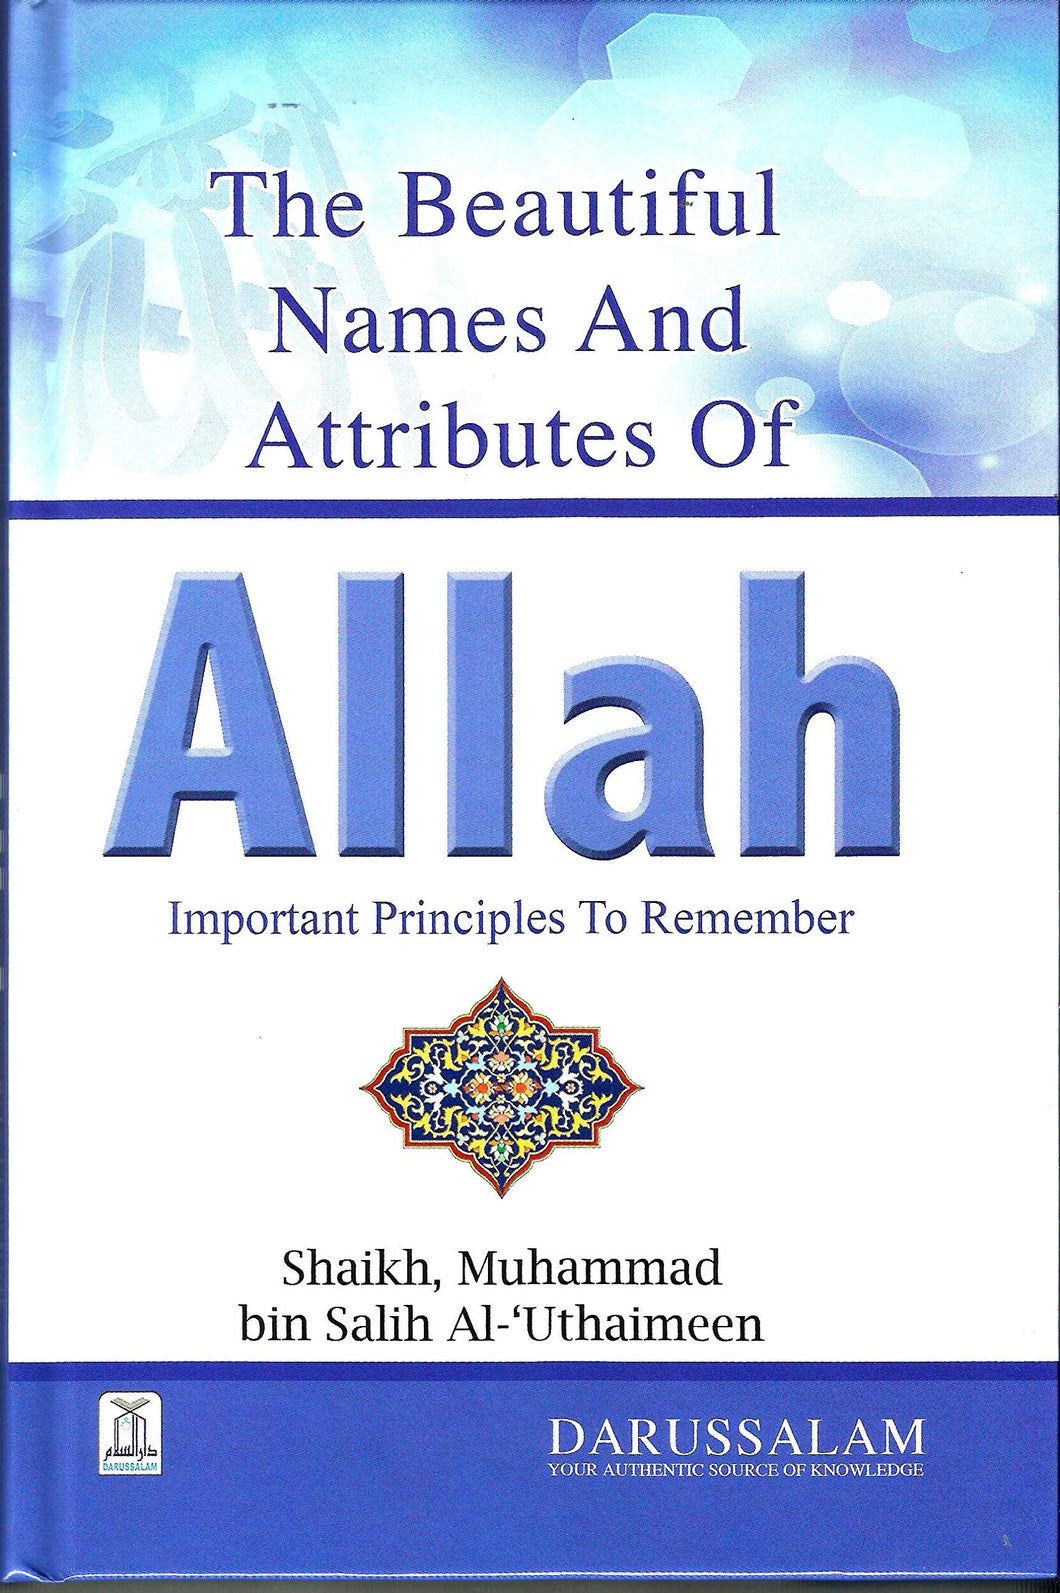 The Beautiful Names and Attributions of Allah